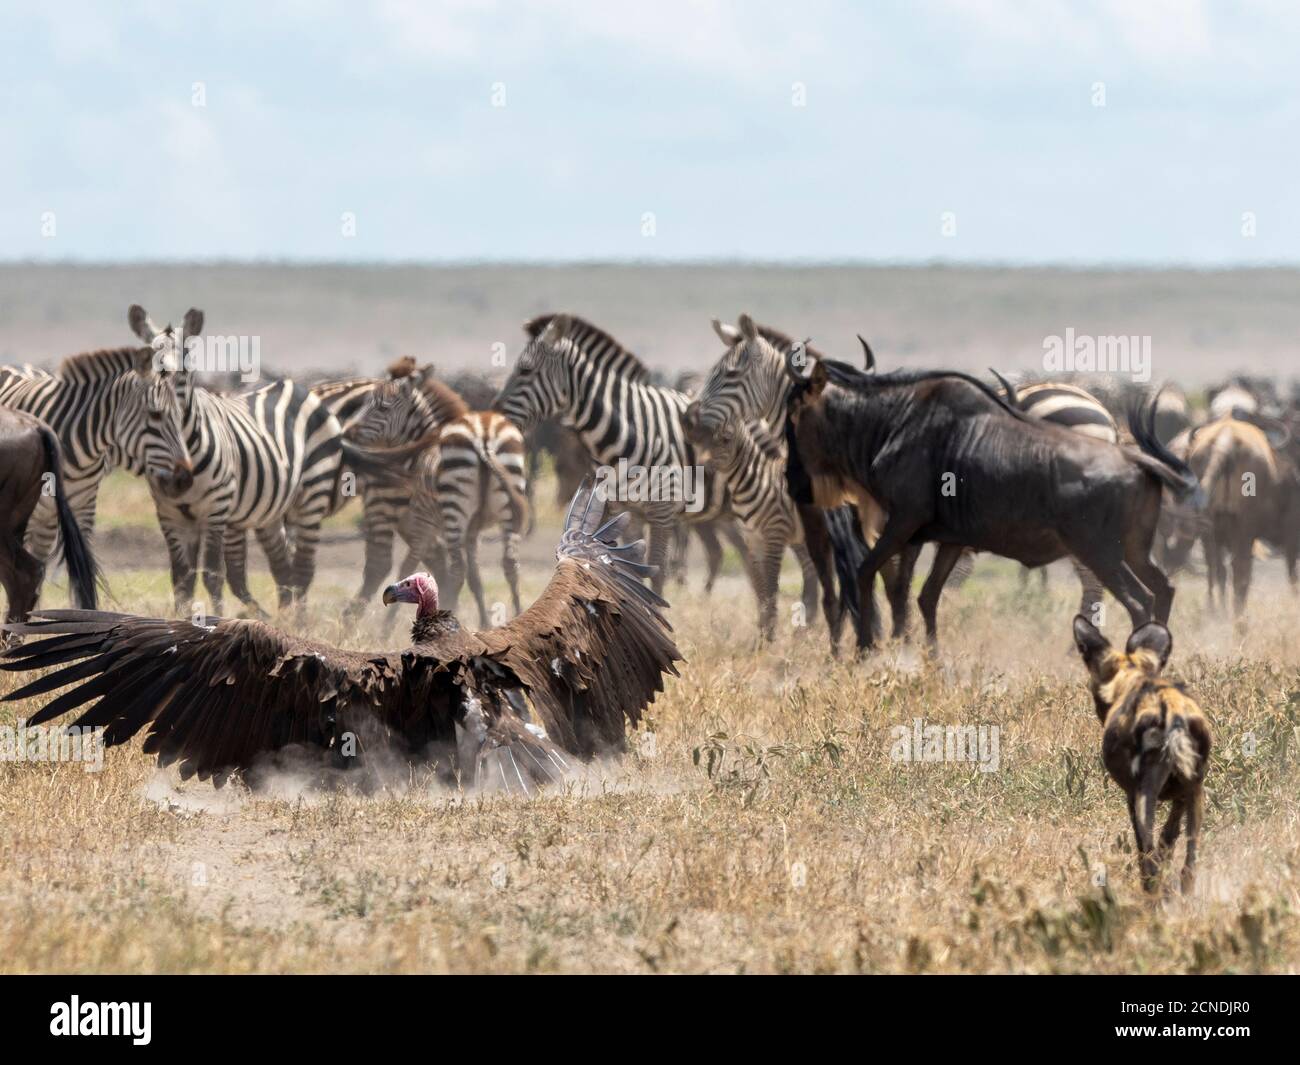 African wild dog (Lycaon pictus), pushing a lappet-faced vulture off kill in Serengeti National Park, Tanzania, East Africa, Africa Stock Photo